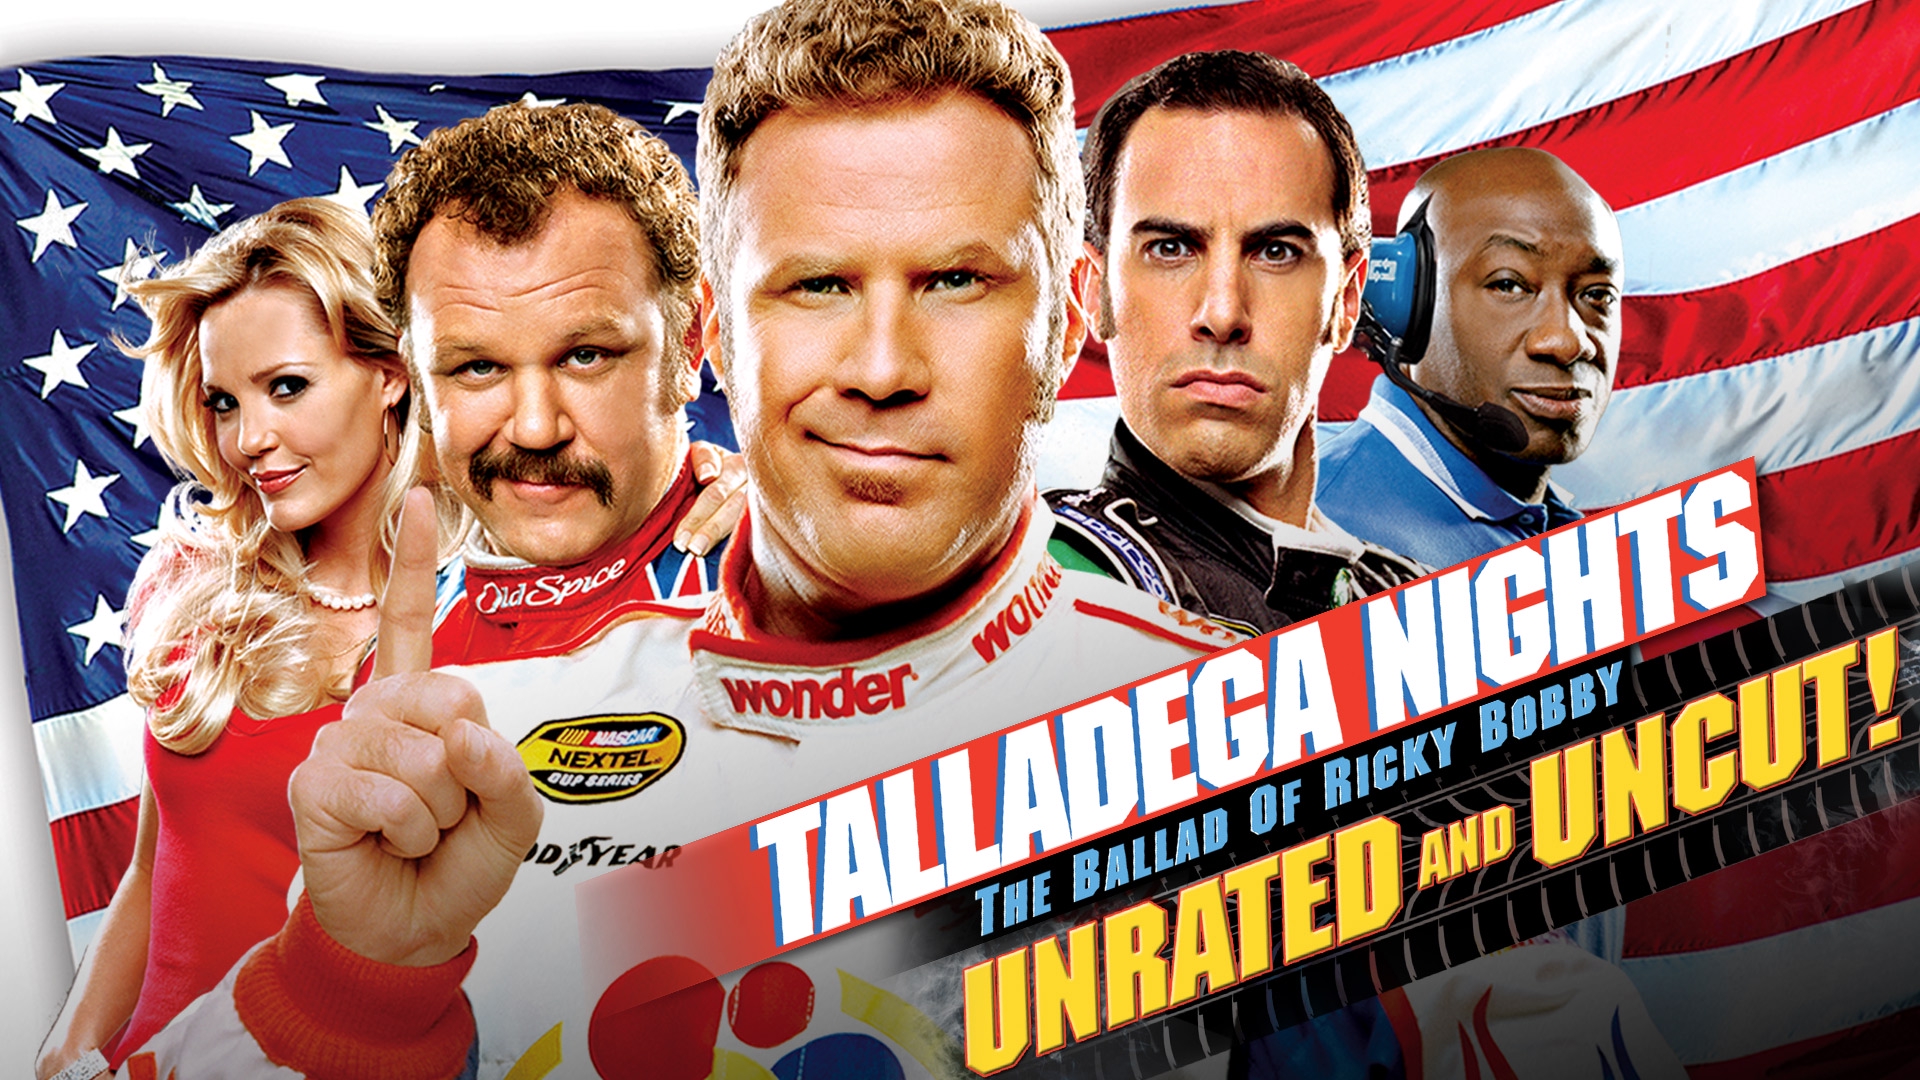 Stream Talladega Nights The Ballad Of Ricky Bobby Unrated And Uncut Online Download And